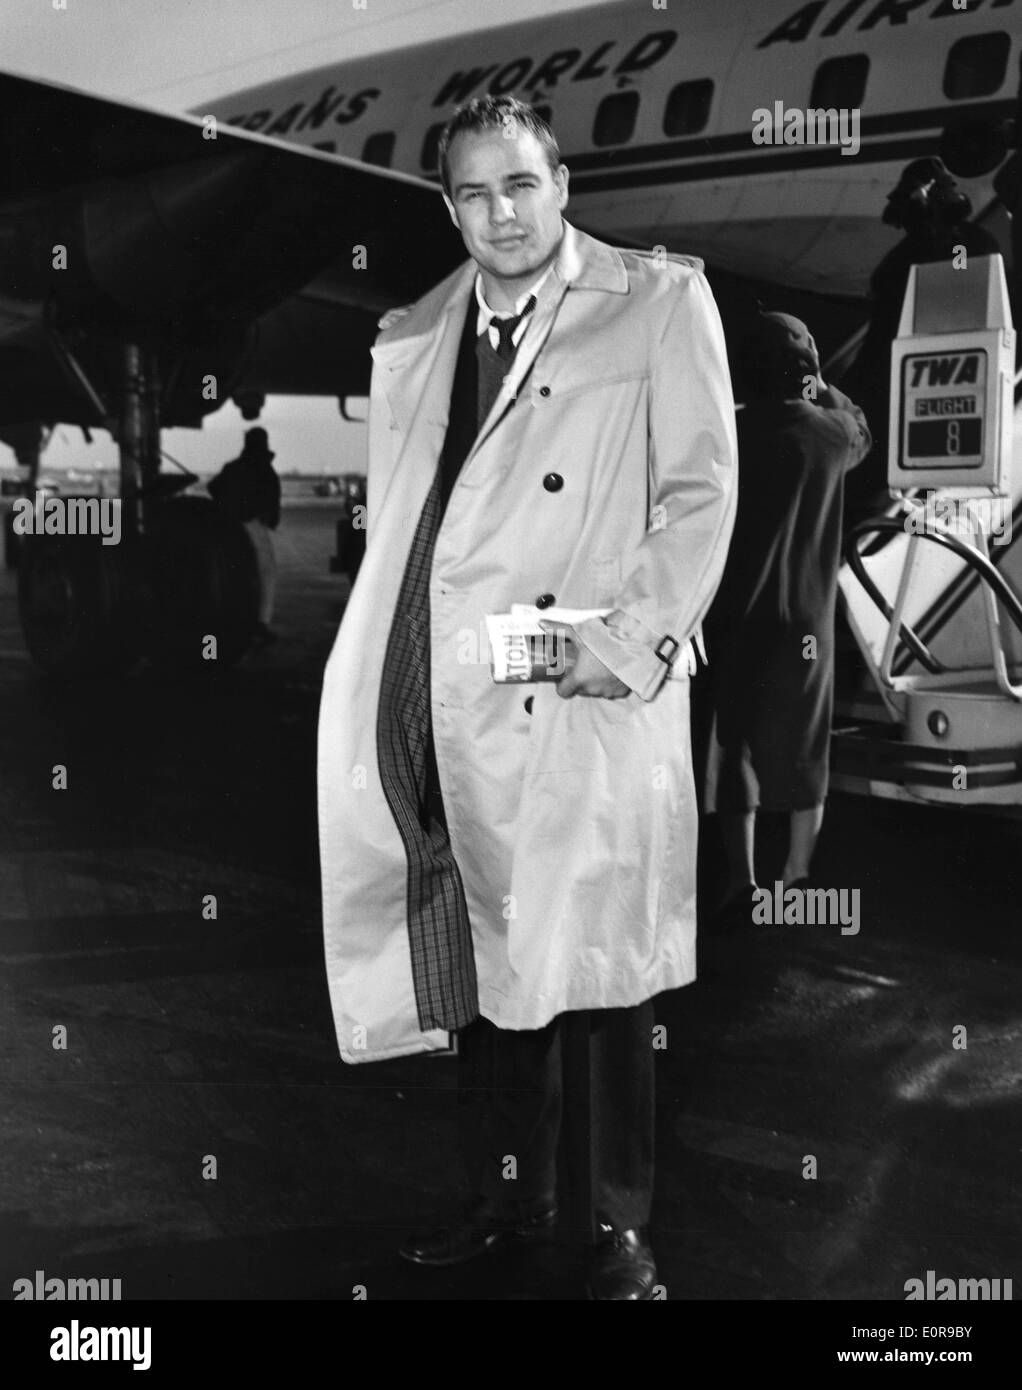 Actor Marlon Brando arriving at the New York Airport Stock Photo